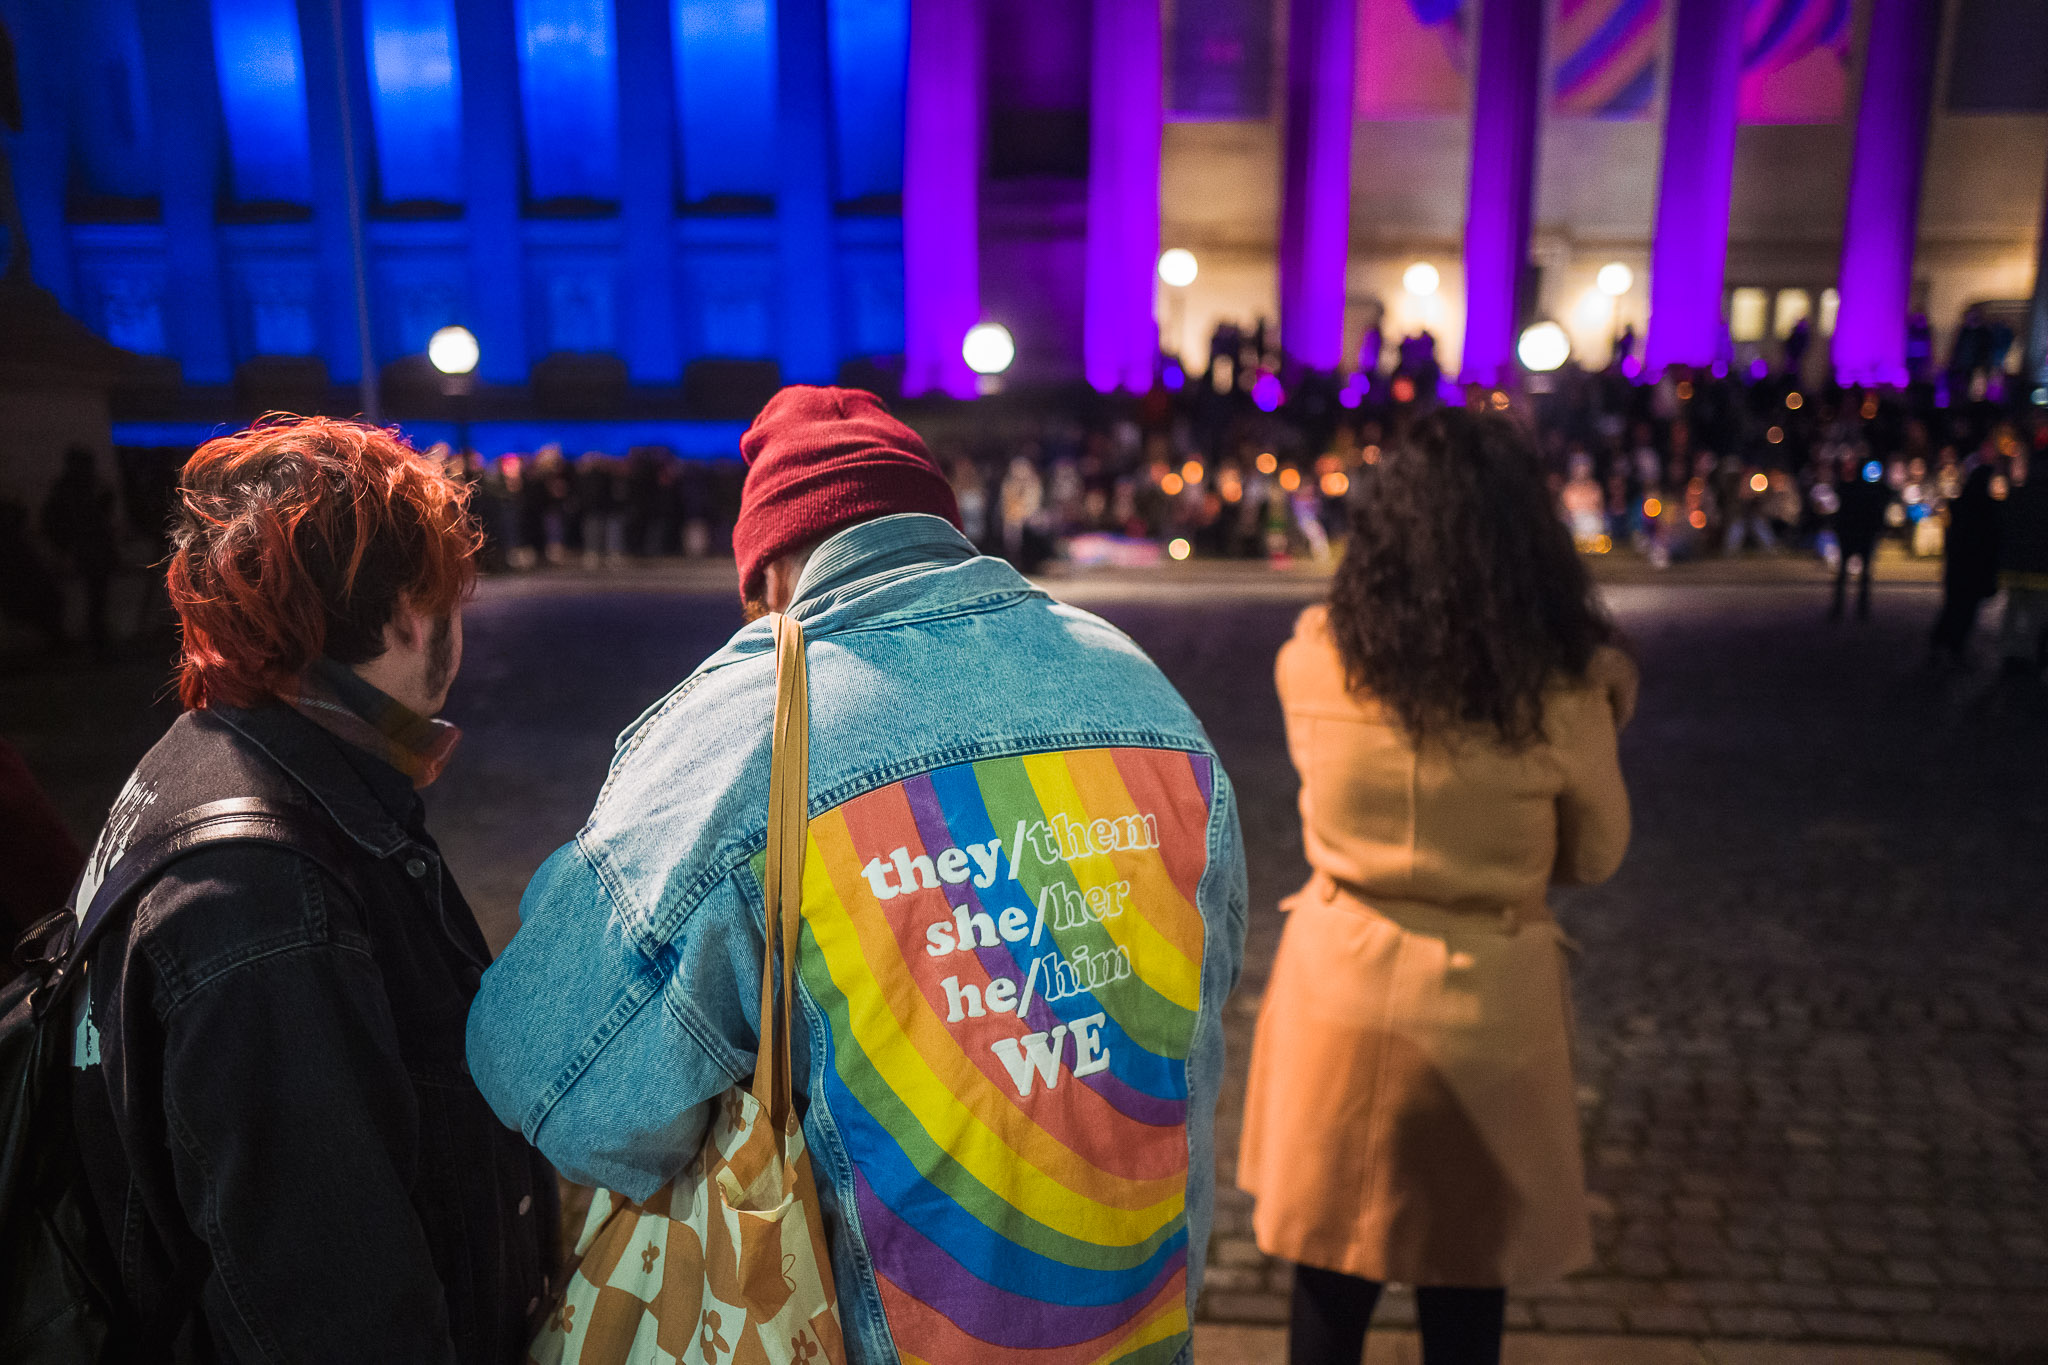 Standing on the plateau of St George's Hall someone is wearing a denim jacket with the message "They/them, she/her, he/him, we." on.